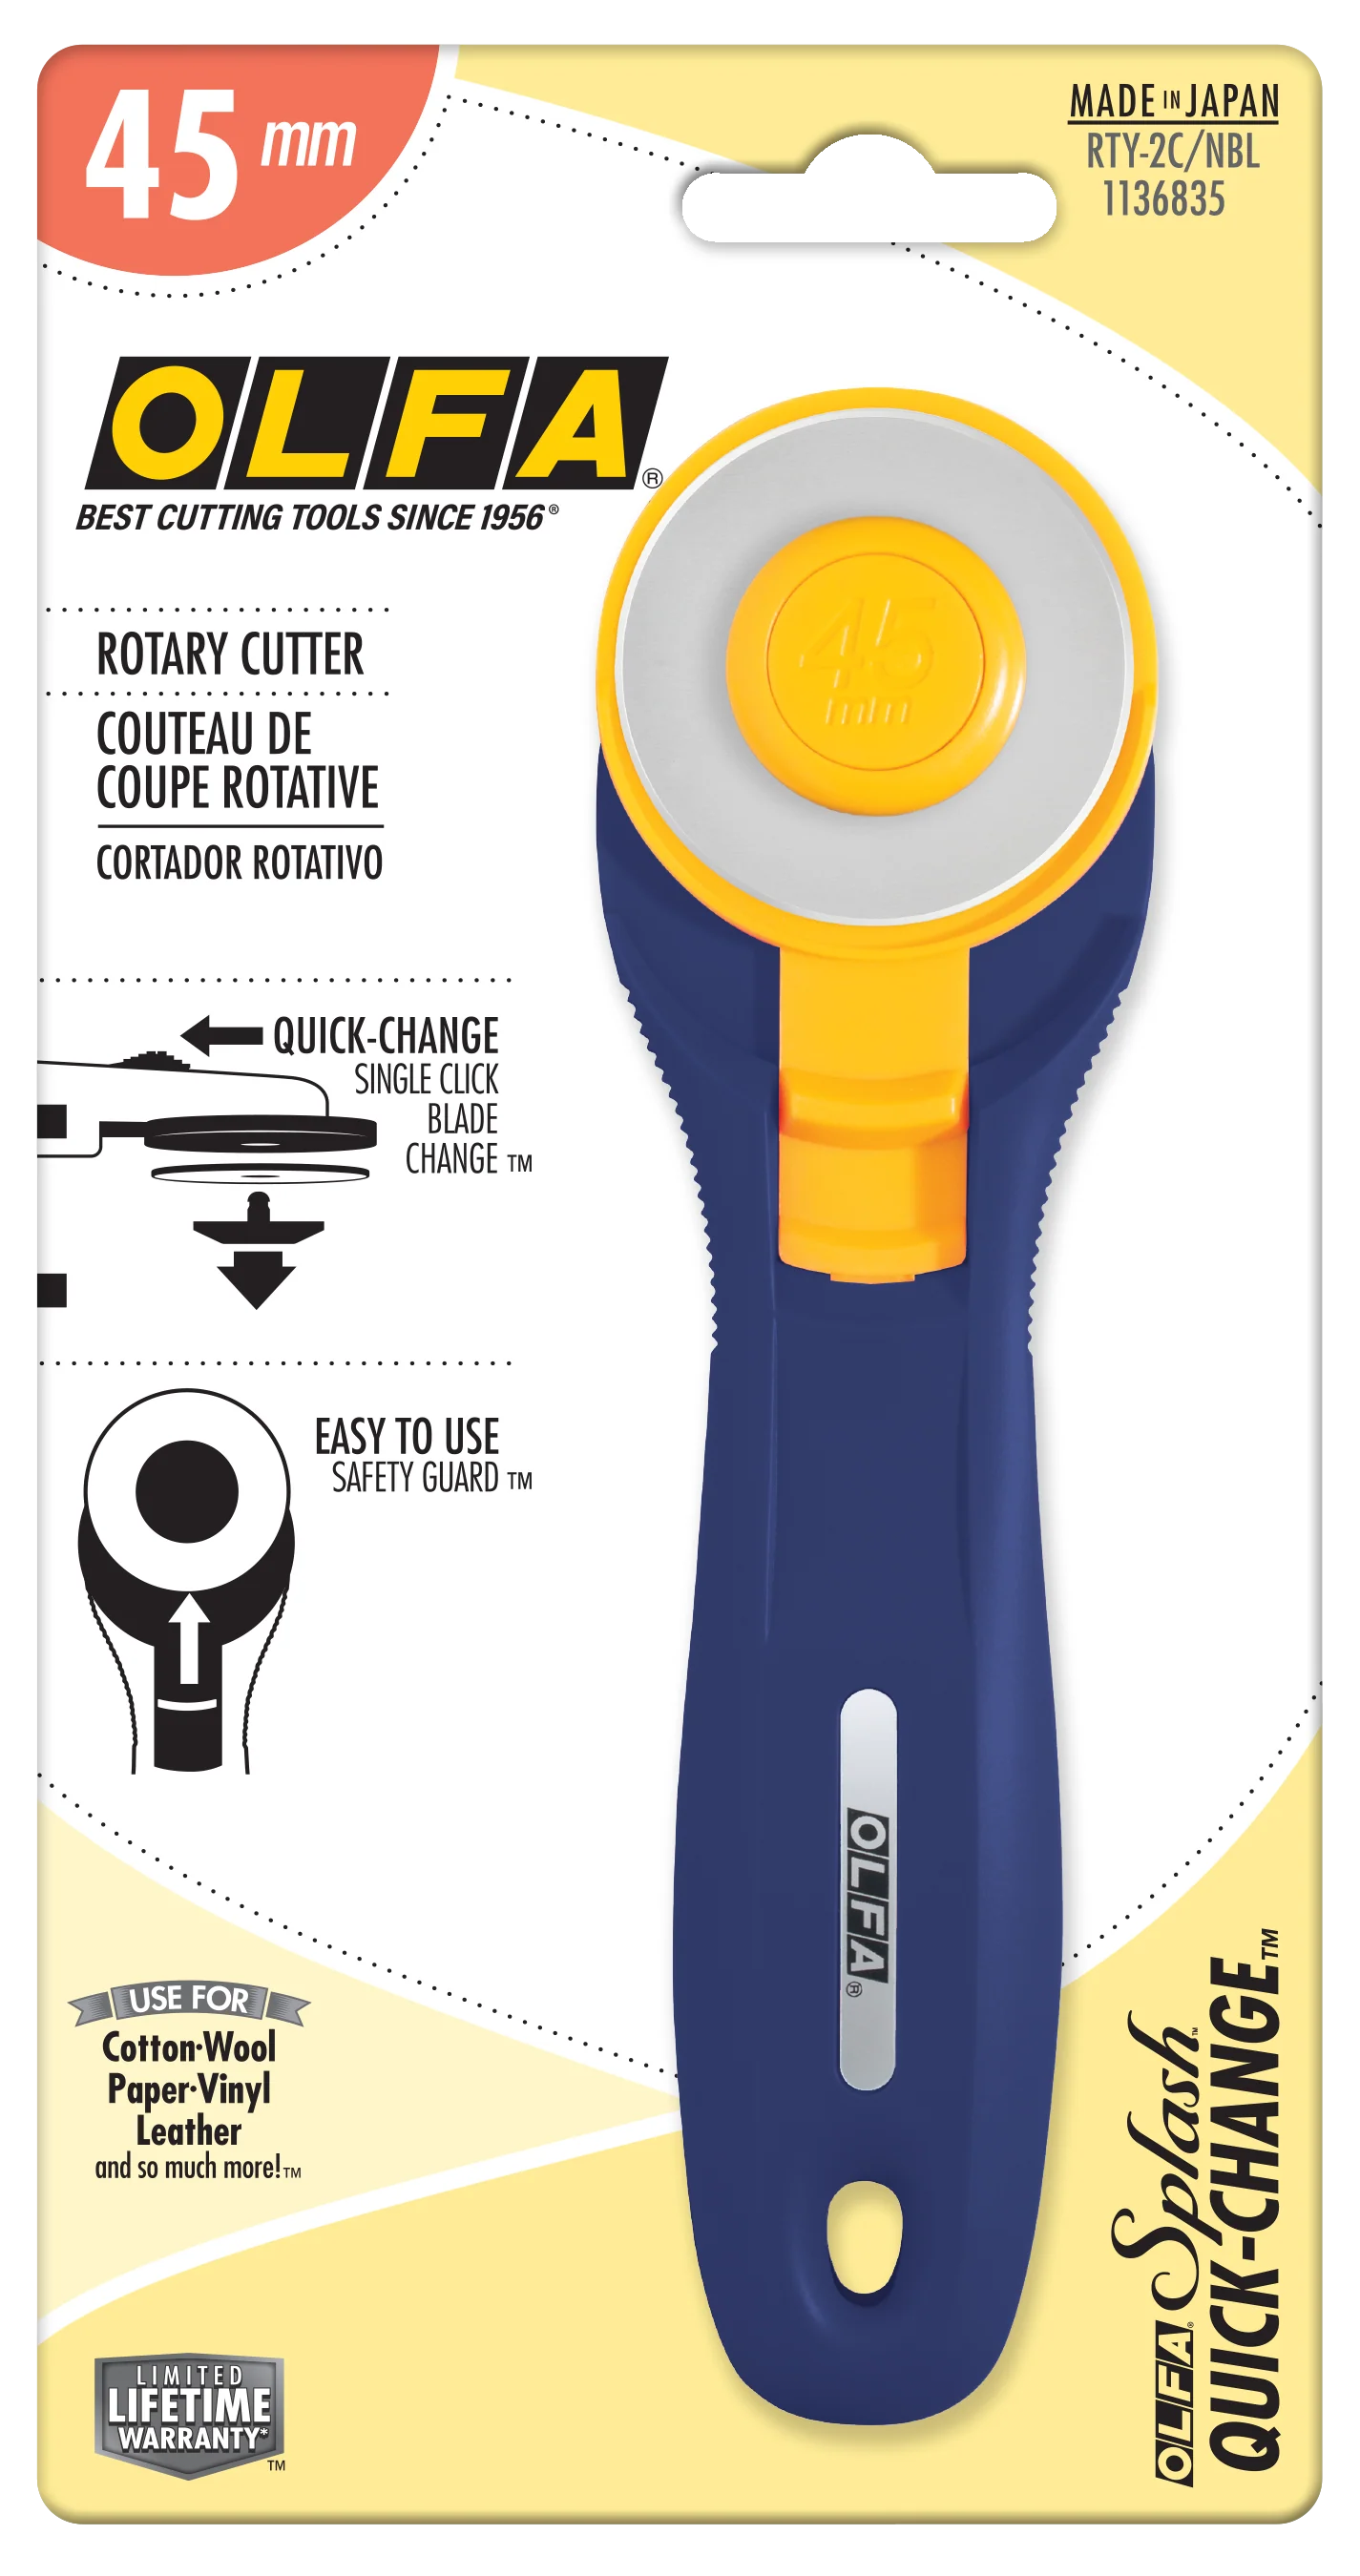 Olfa 45mm RTY-2C/NBL Quick-Change Rotary Cutter, Navy Blue